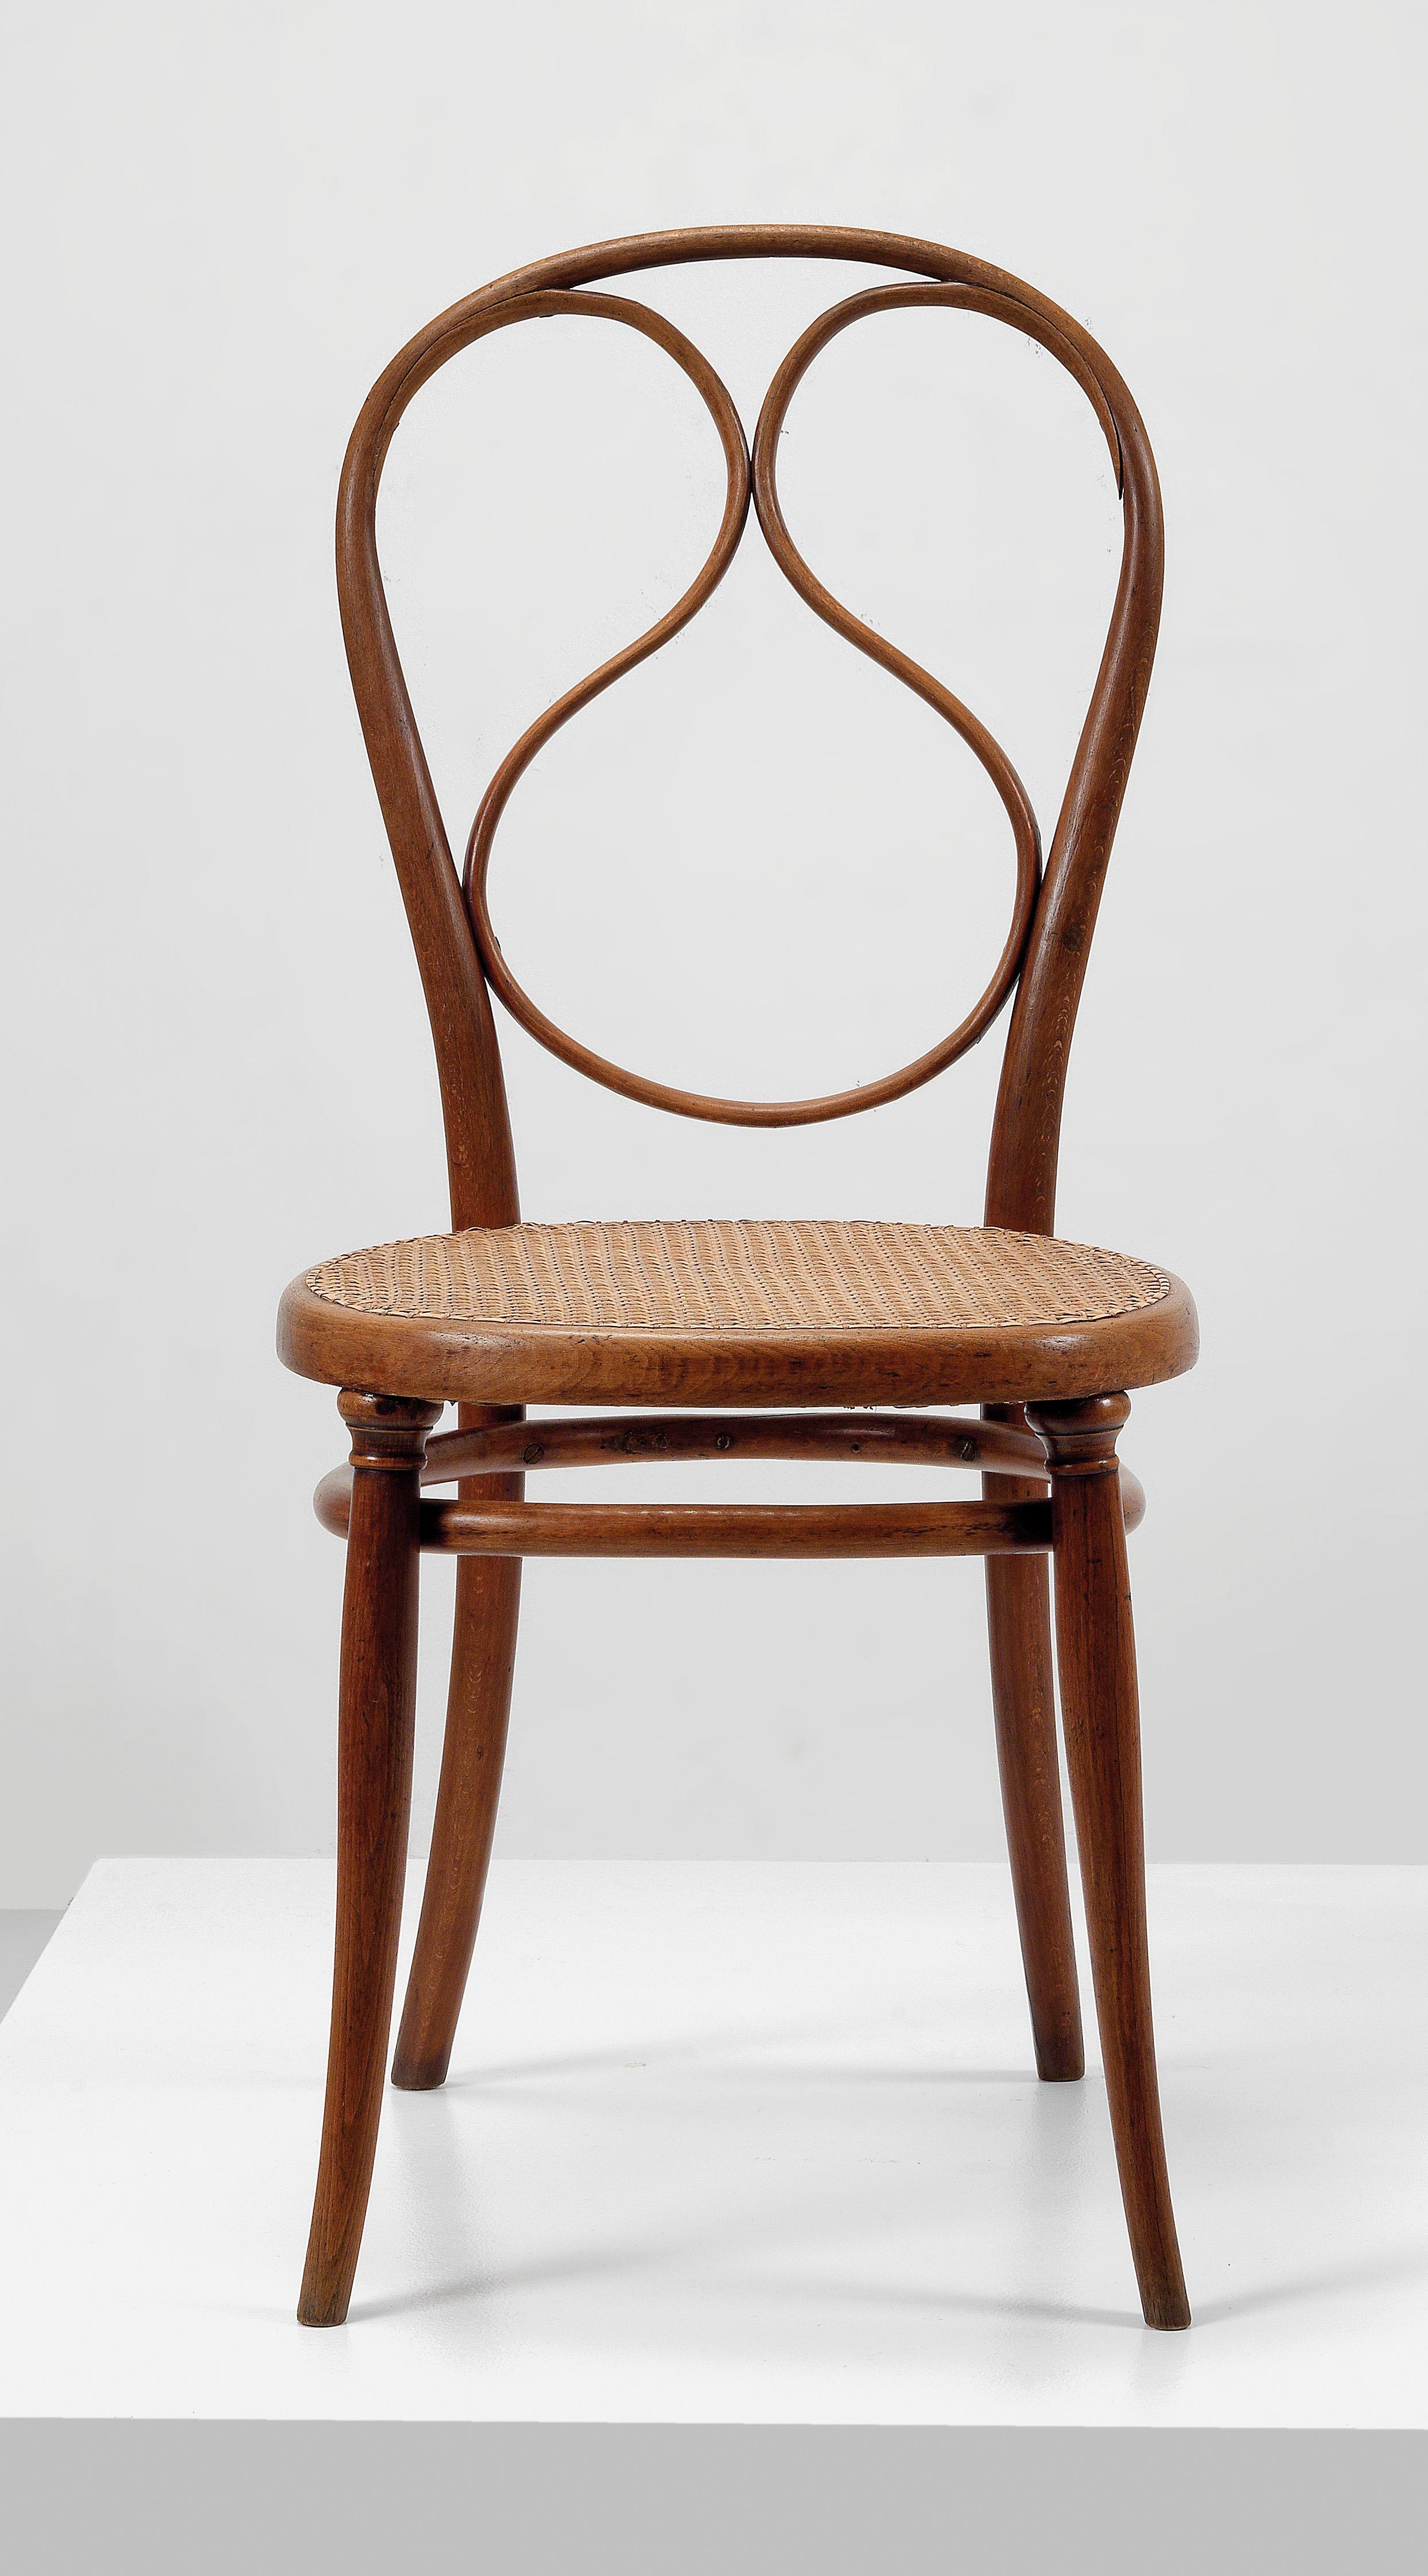 A bentwood chair, Model No. 1 by Michael Thonet, 1870-1881